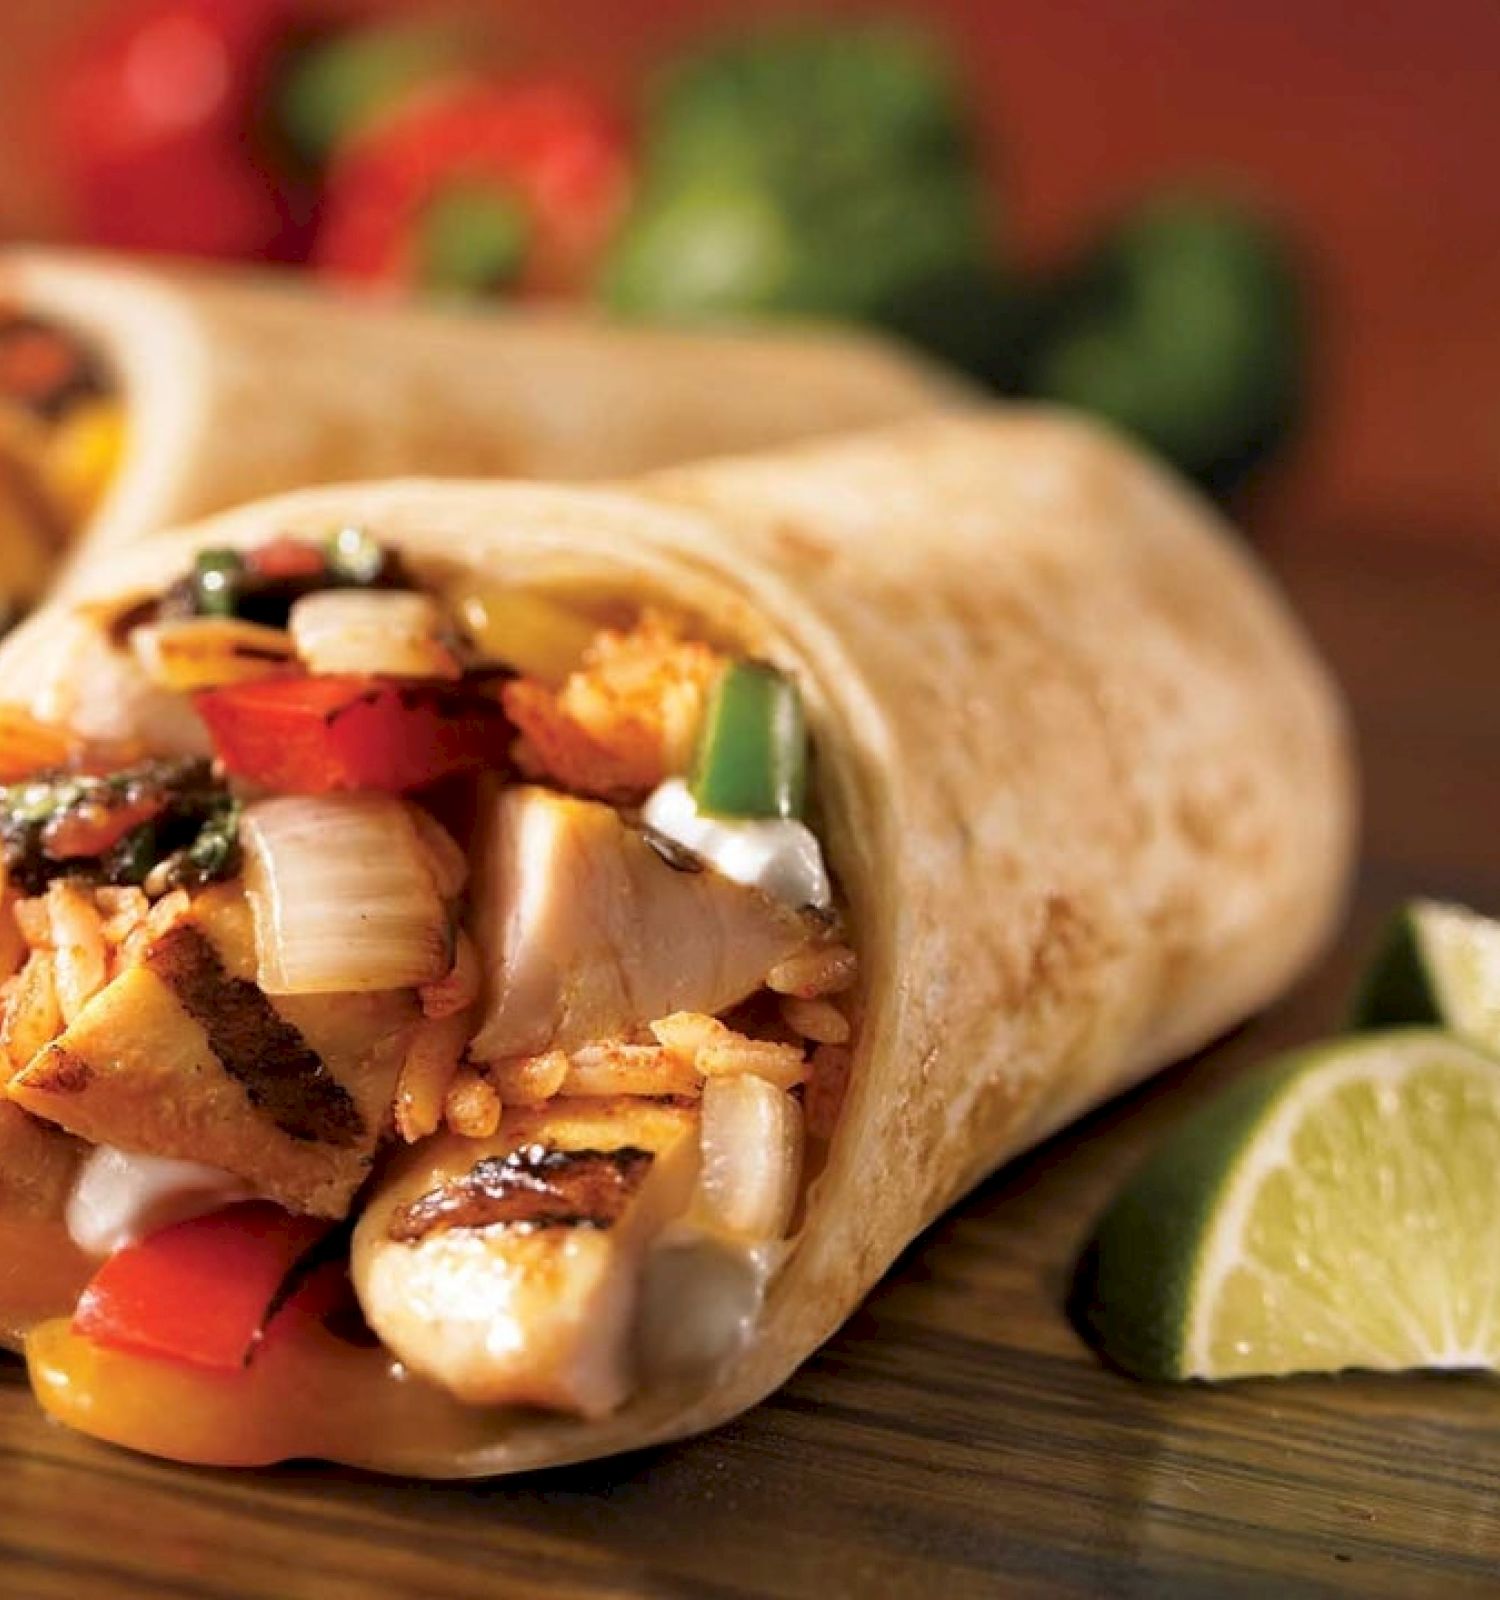 The image shows two burritos filled with vegetables, rice, and grilled chicken, accompanied by lime wedges, with a blurred background of tomatoes and peppers.